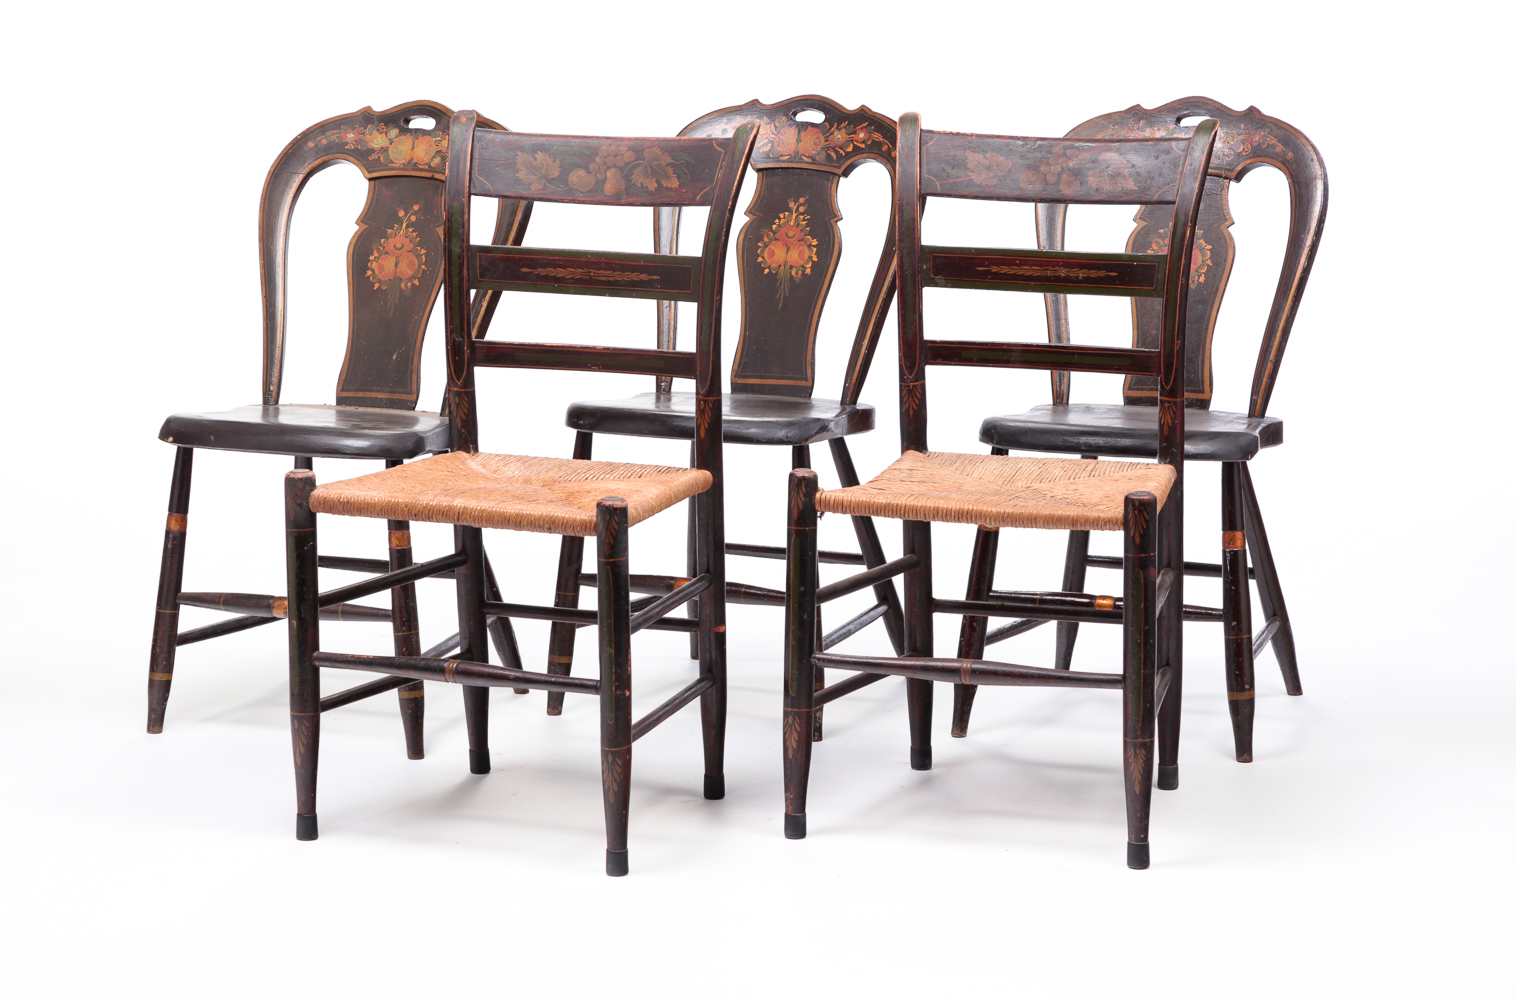 FIVE AMERICAN PAINT DECORATED CHAIRS  2dff51